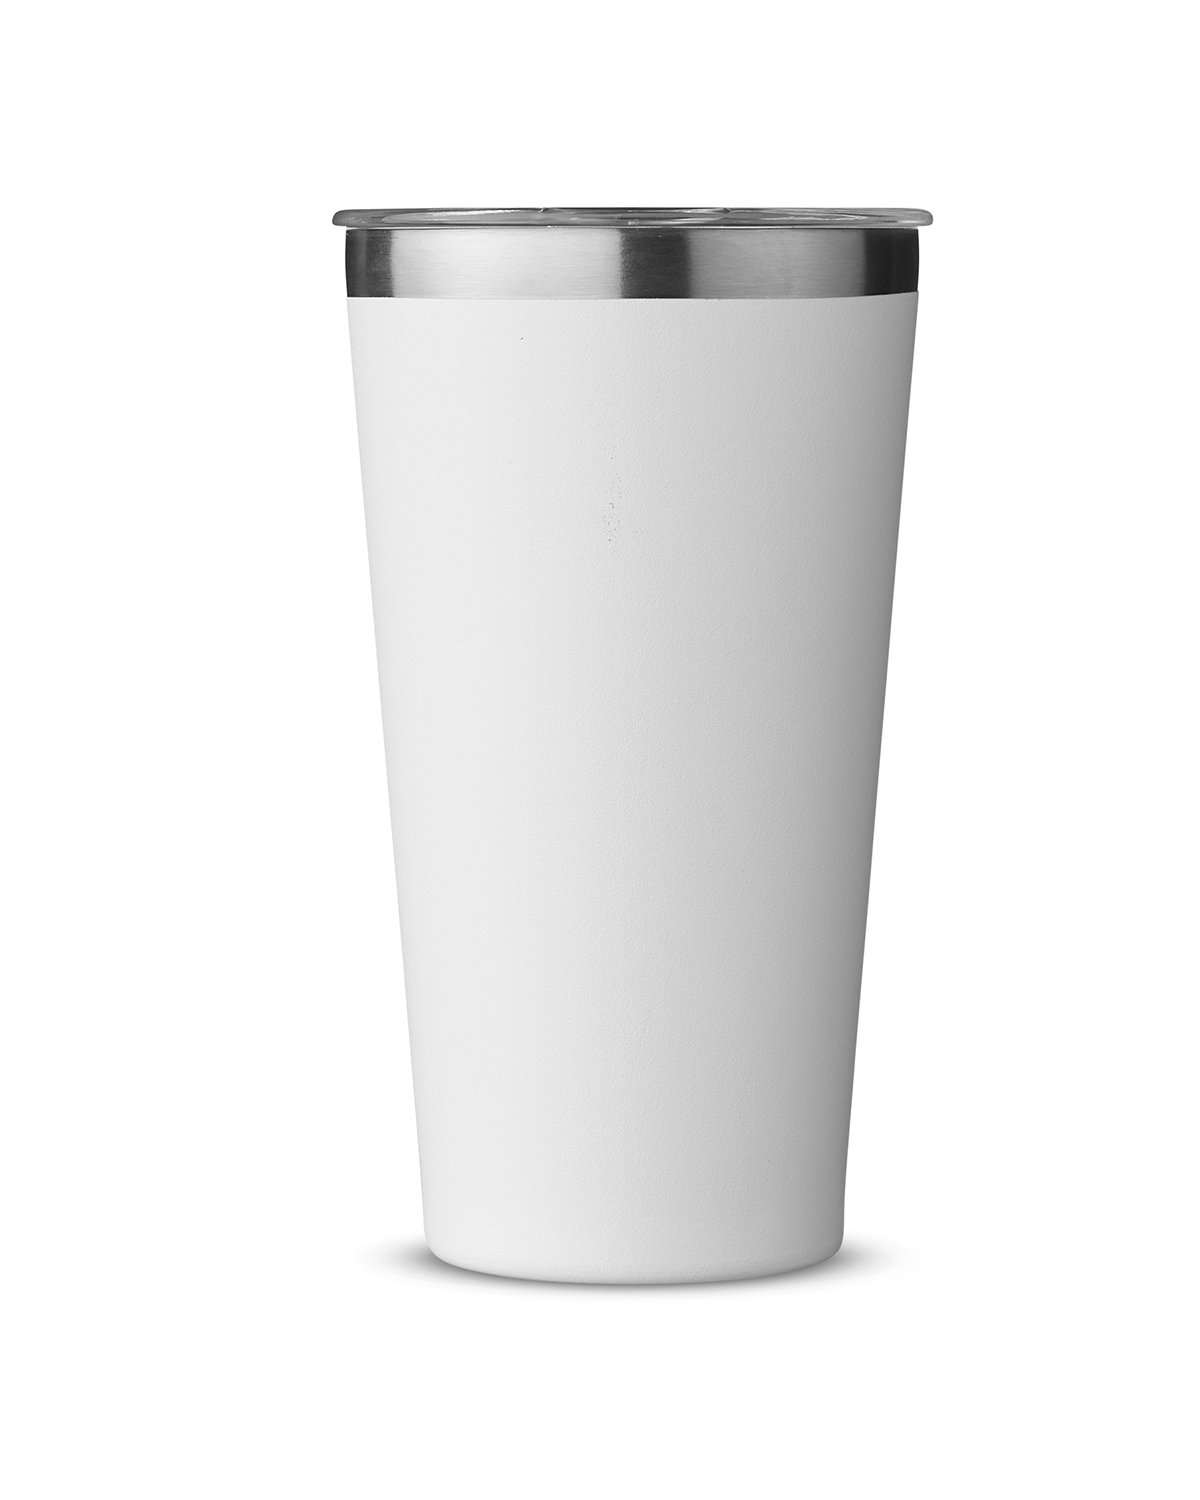 Columbia COR-011 - 17oz Vacuum Cup With Lid